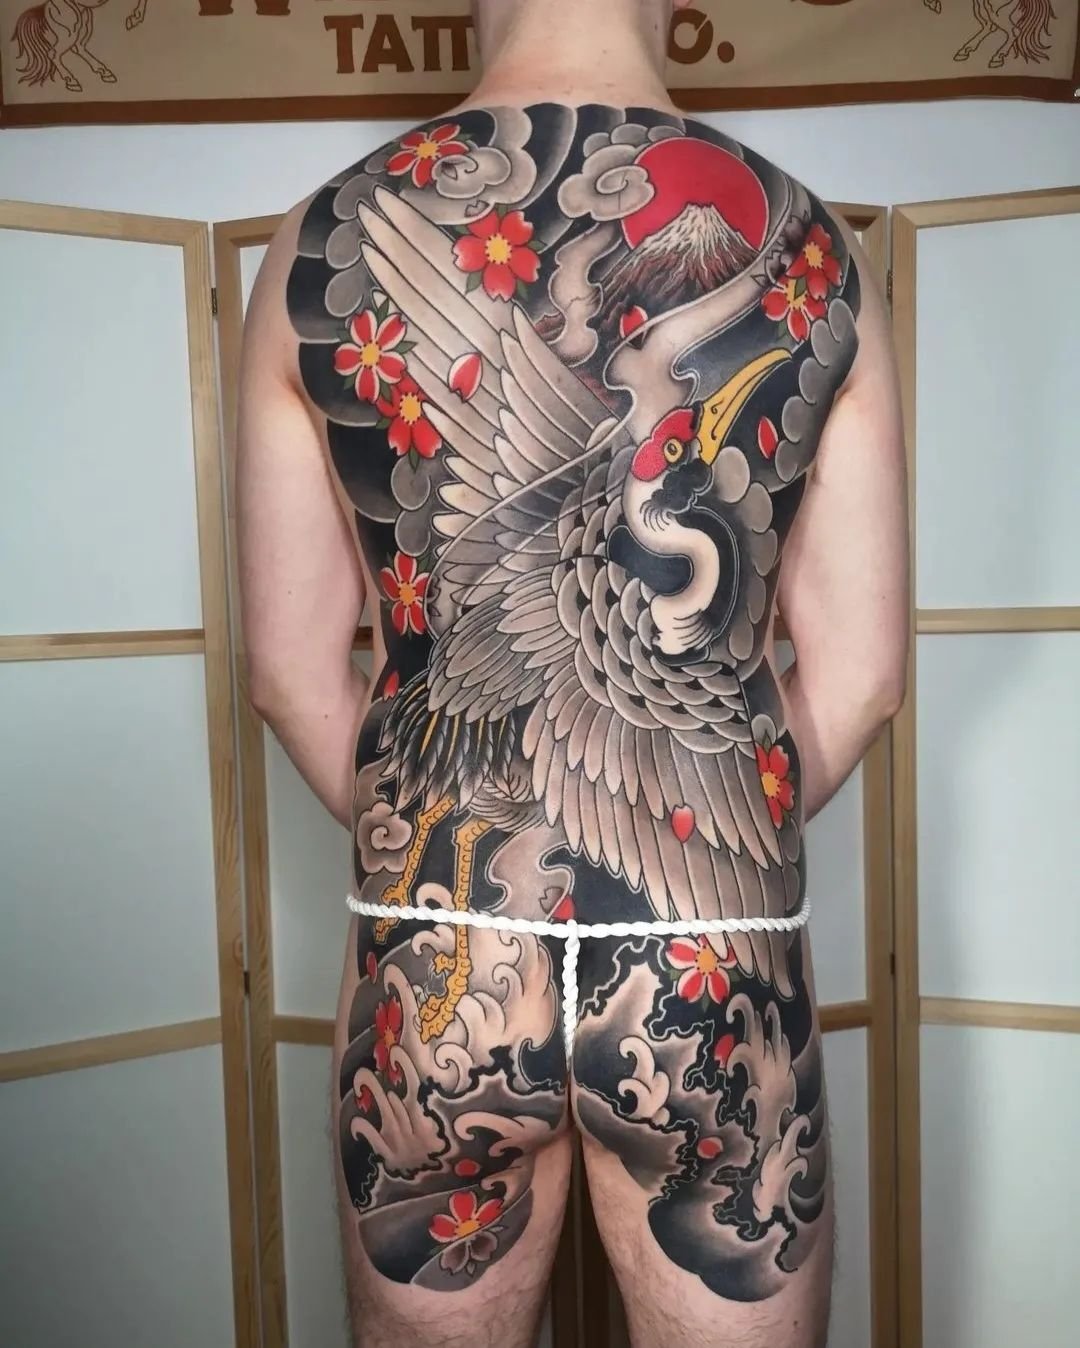 Incredible crane backpiece for Liam 🌸 - done by @dannywildhorses 

Danny finished off this backpiece at @tattooteaparty Manchester last month, where it picked up the 'Best Oriental' award. 

This was Liam's first ever tattoo 💪

Danny specialises in